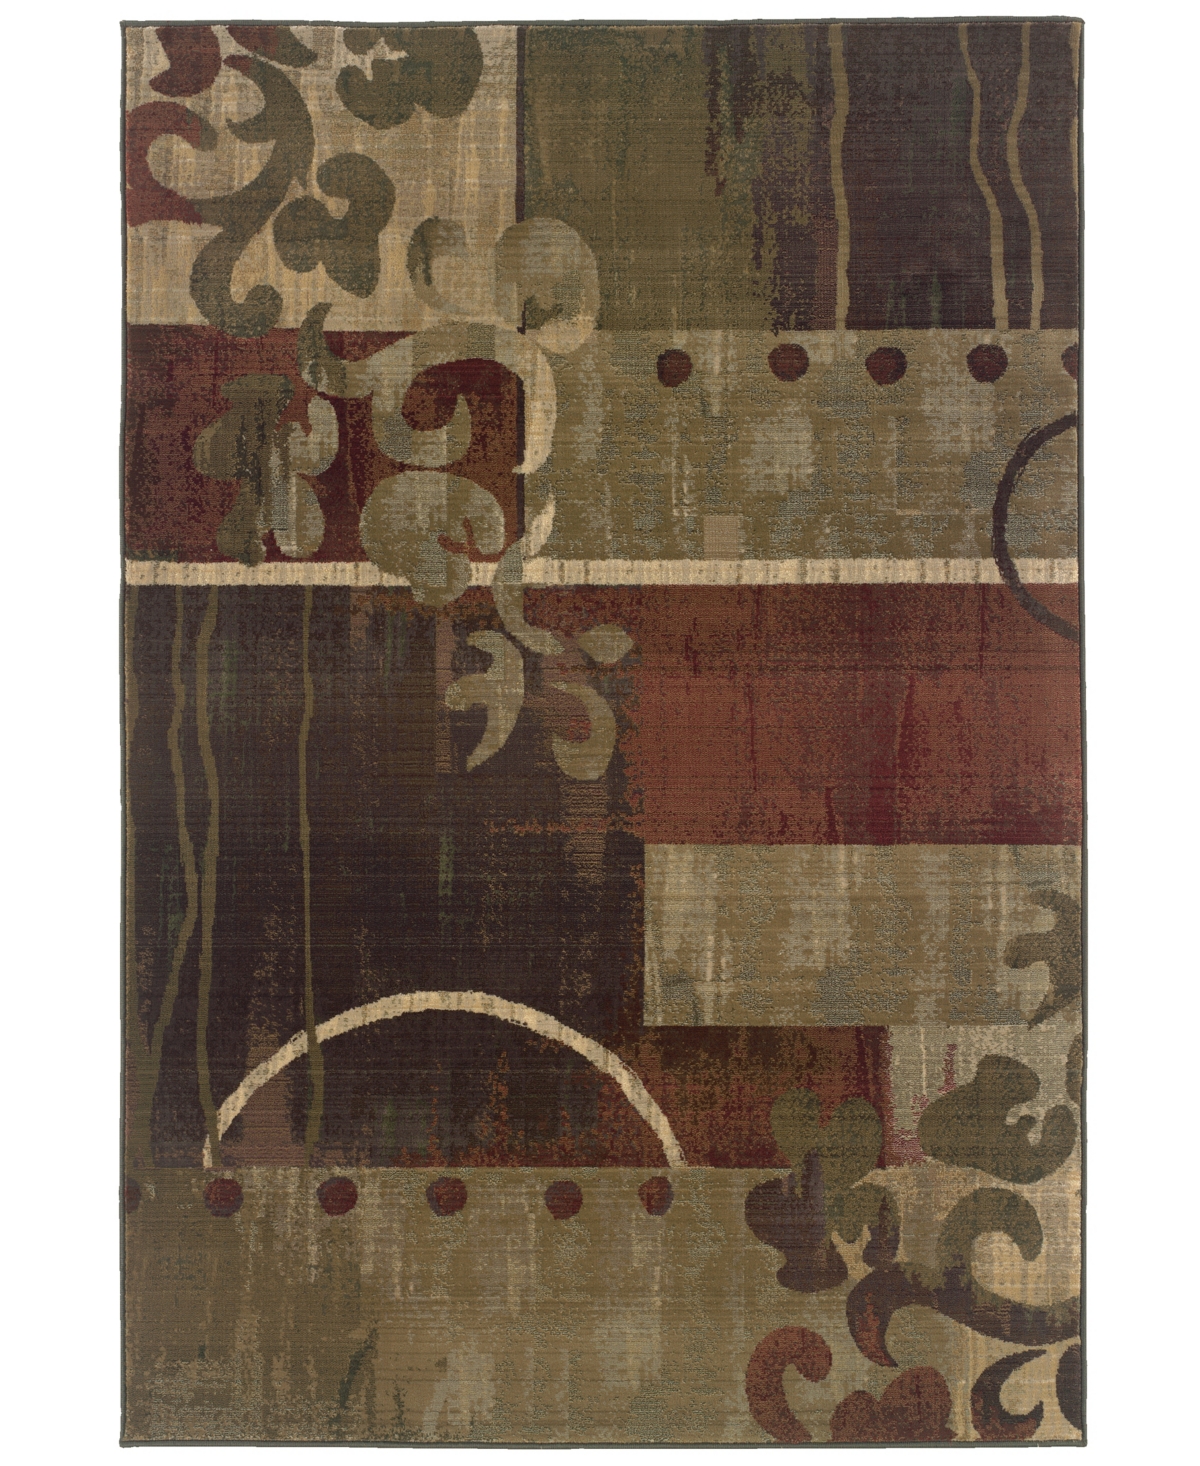 Oriental Weavers, Generations 8007A Tranquility 7'10in x 11in Area Rug